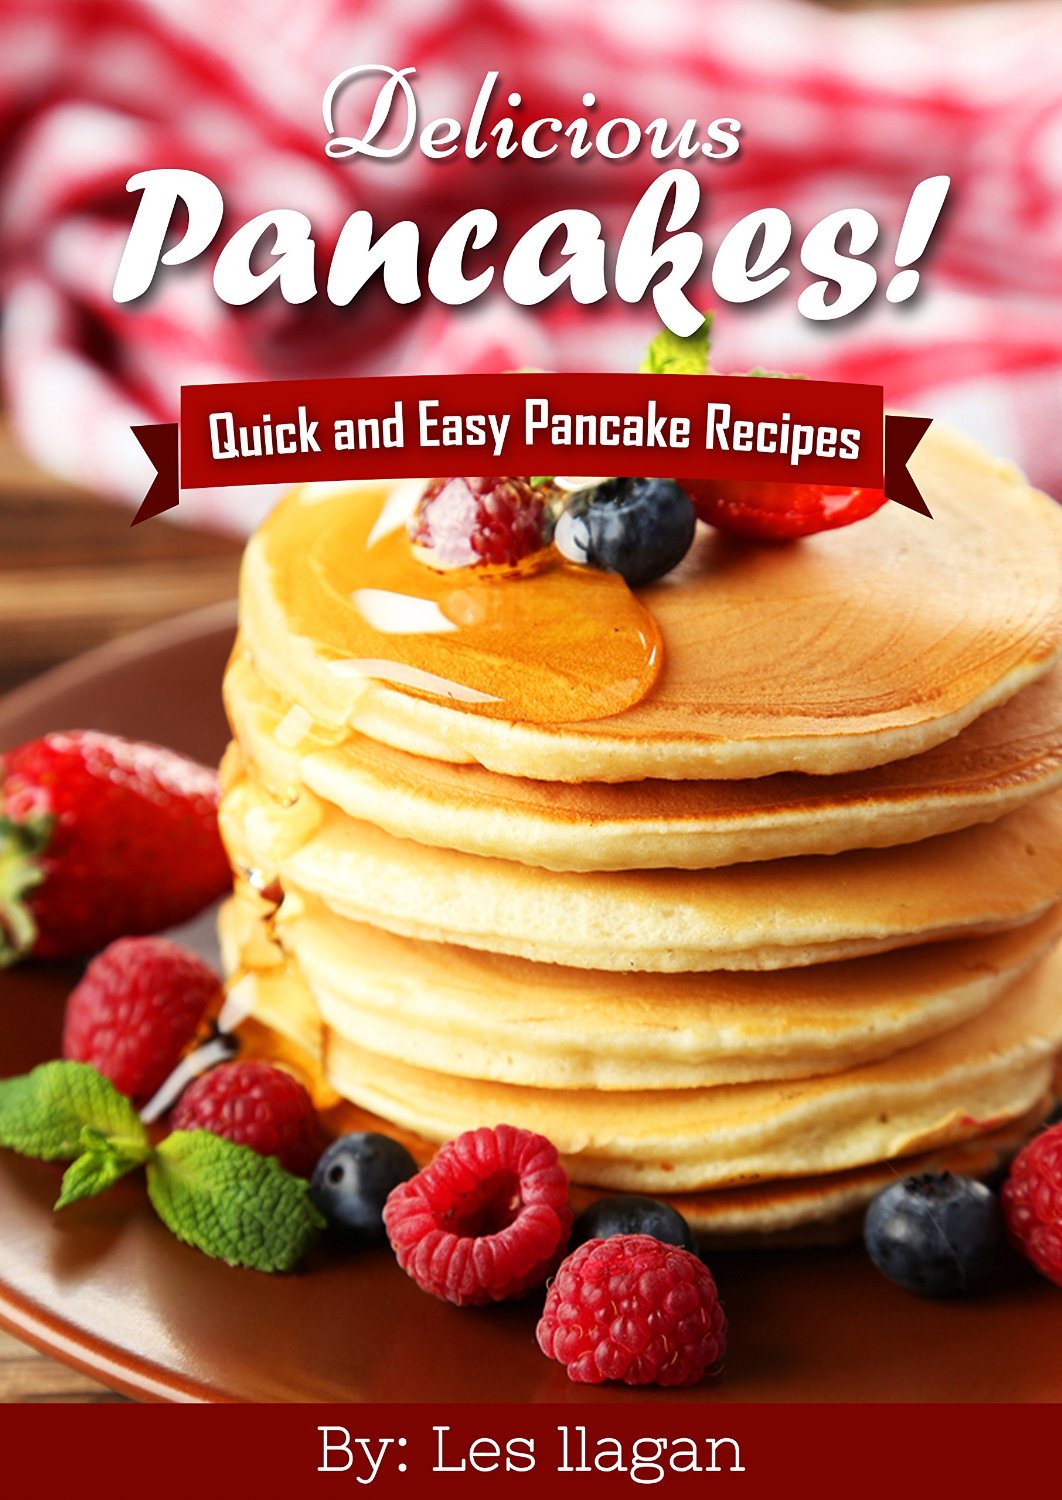 Delicious Pancakes Recipes! Quick And Easy Pancakes Recipes